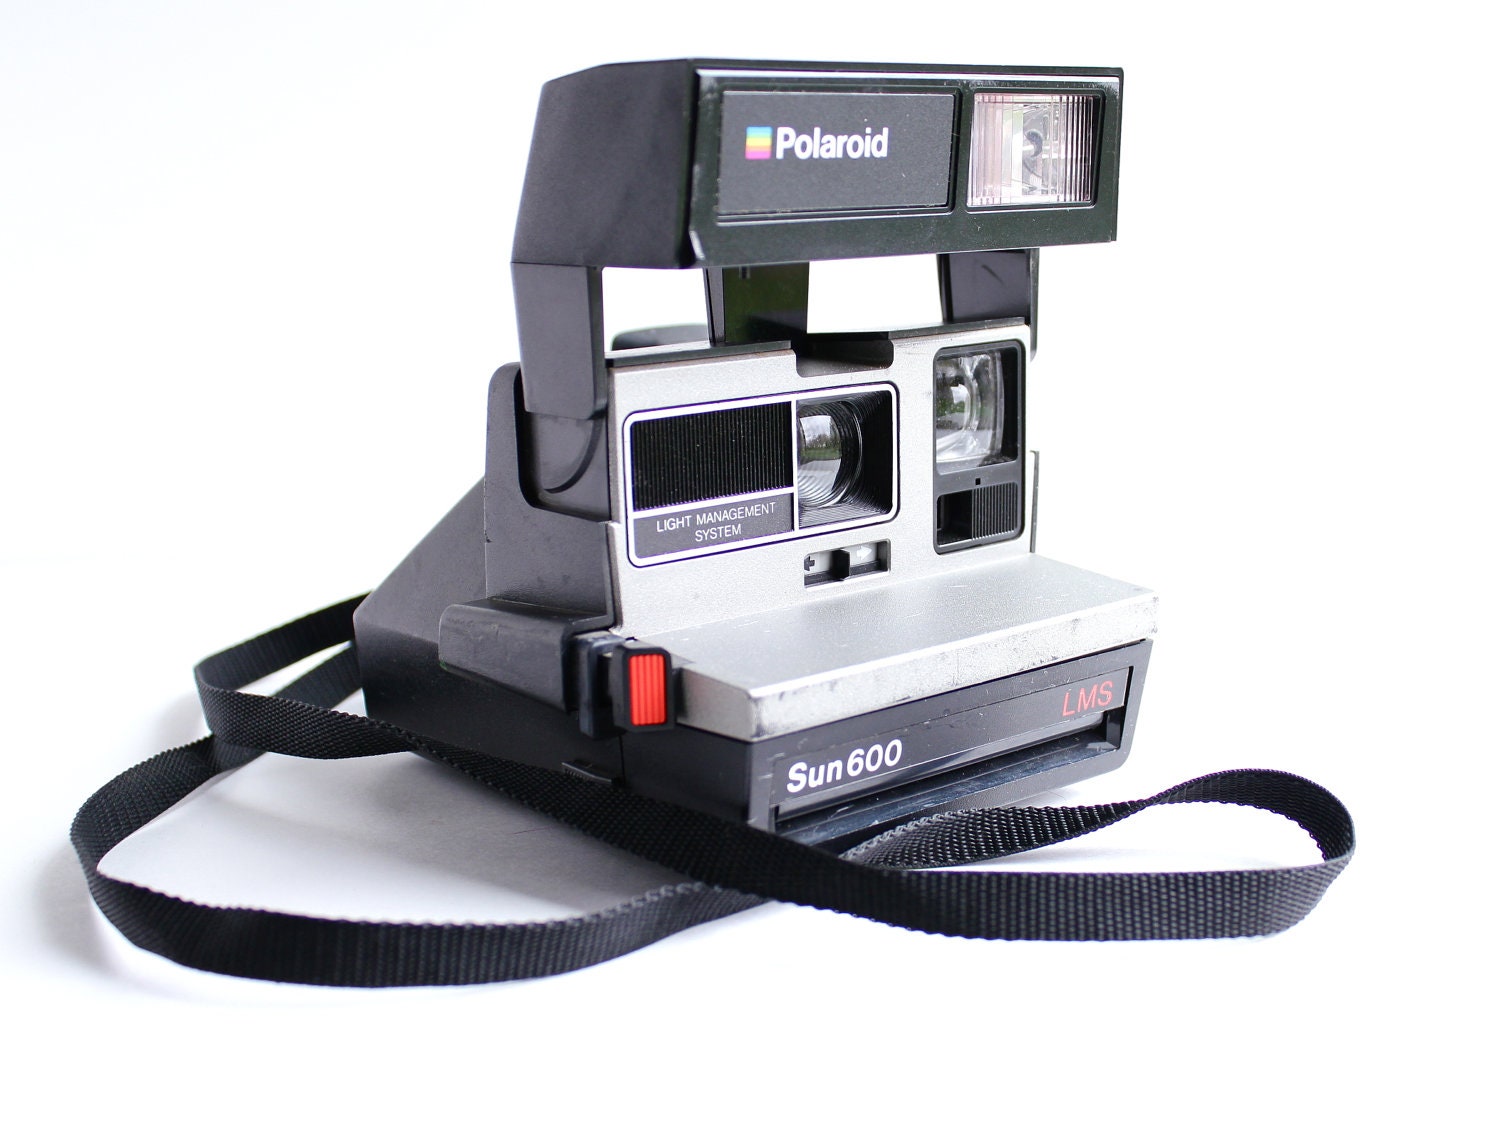 Vintage Polaroid Camera Black And Silver 1980s By Maejeanvintage